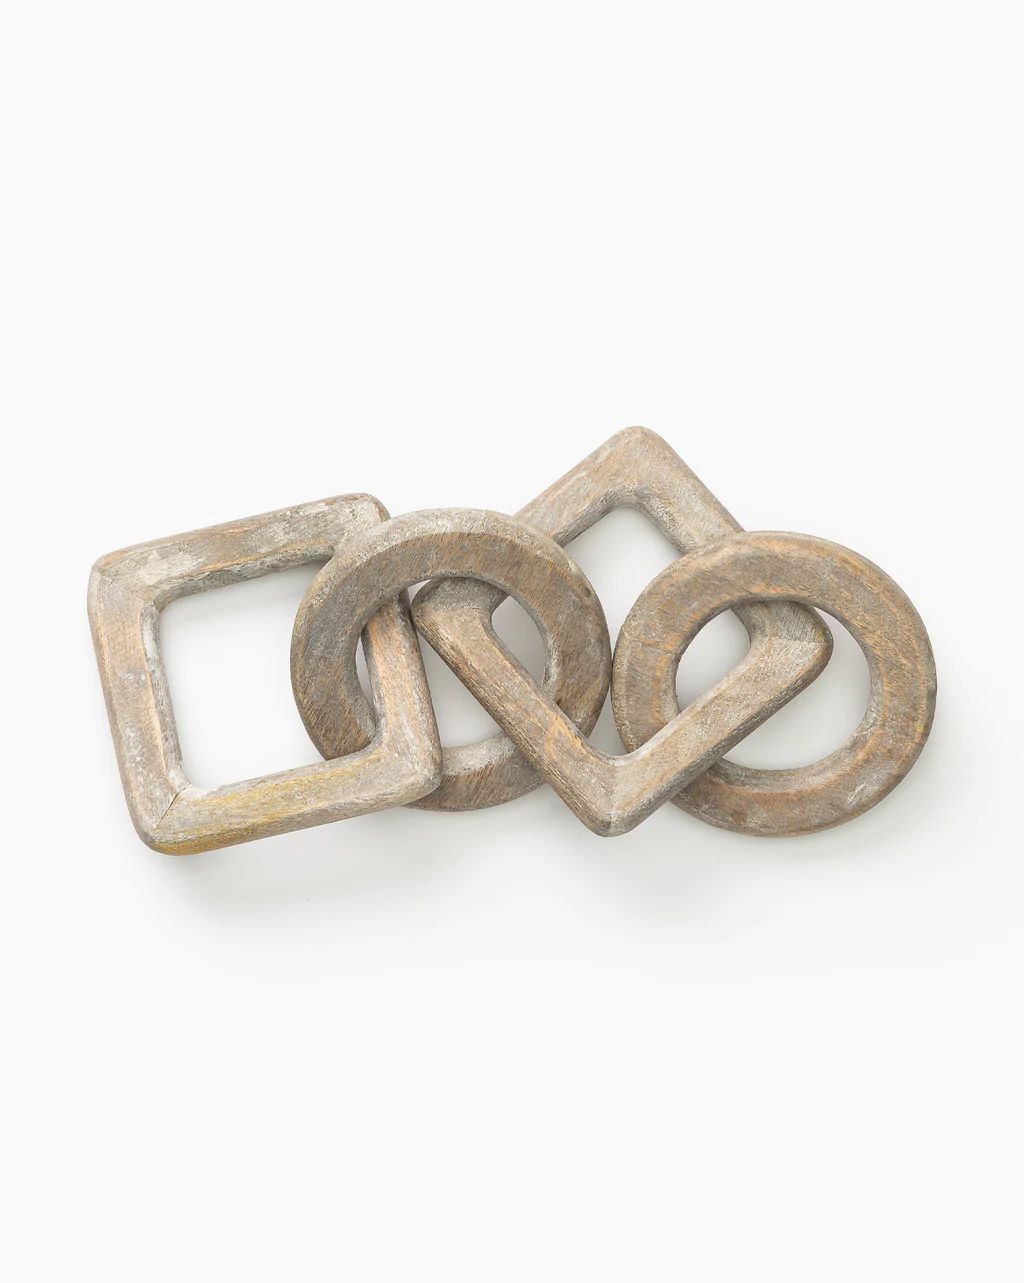 Round & Square Wooden Links | McGee & Co.